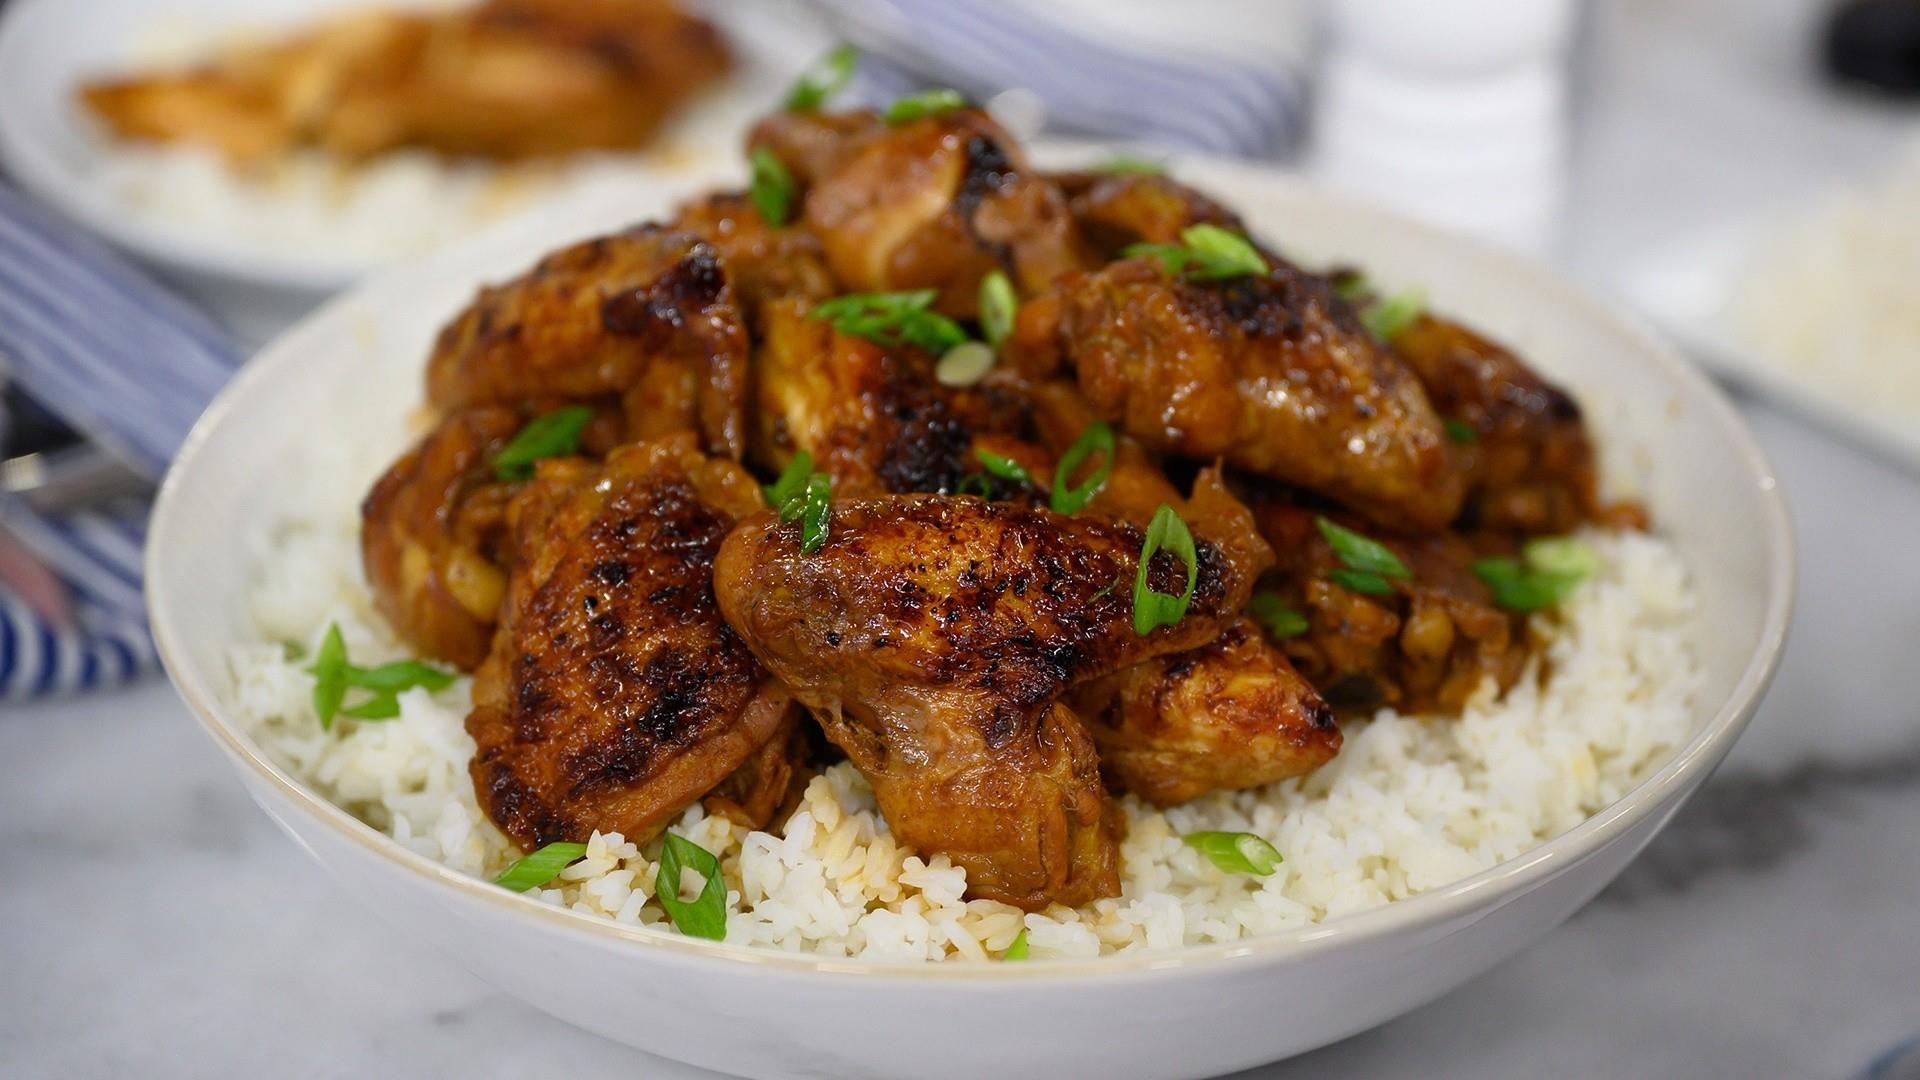 Chicken adobo with brown rice